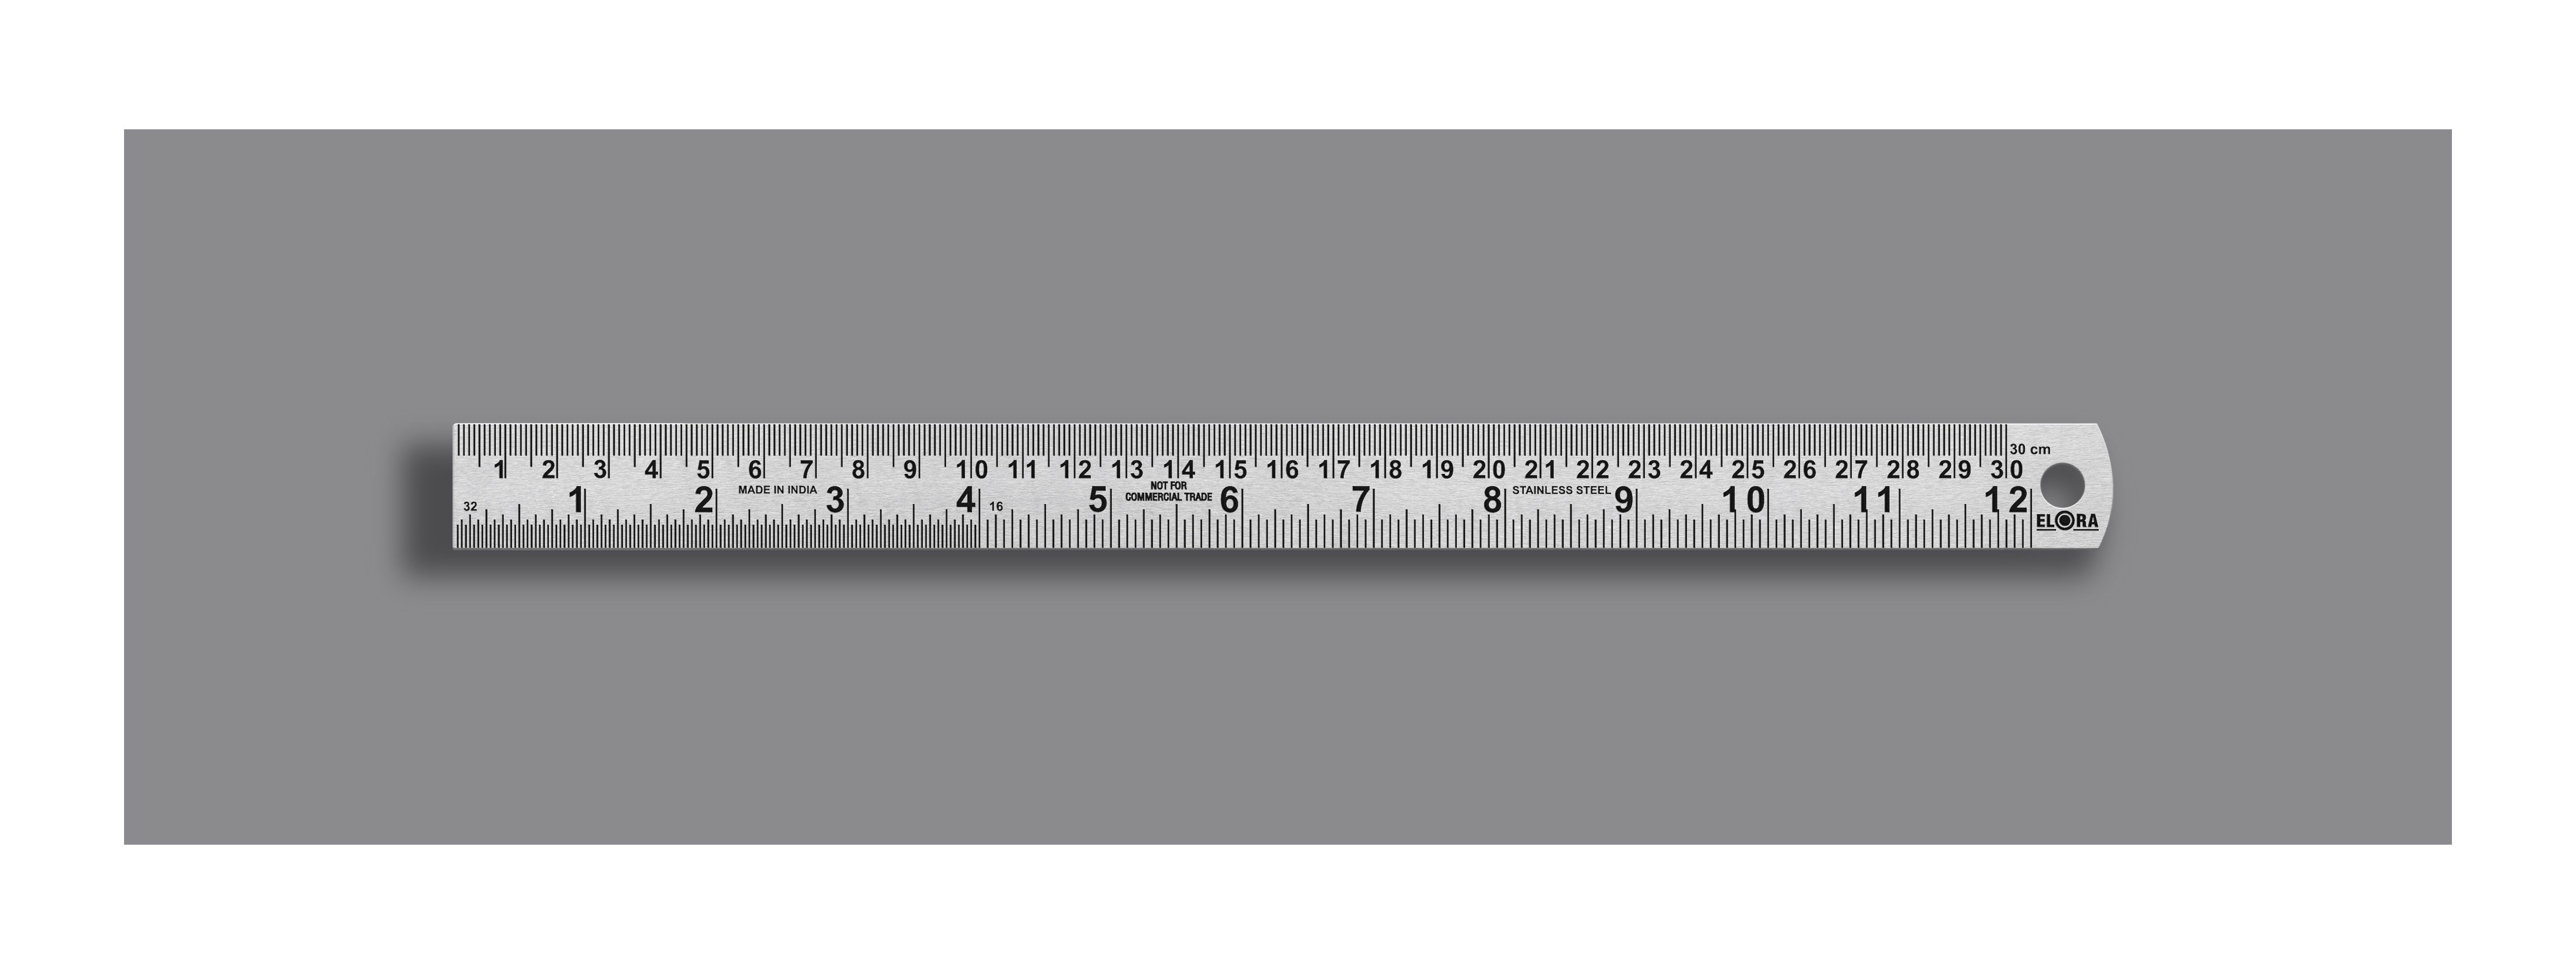 shell shock ruler print out